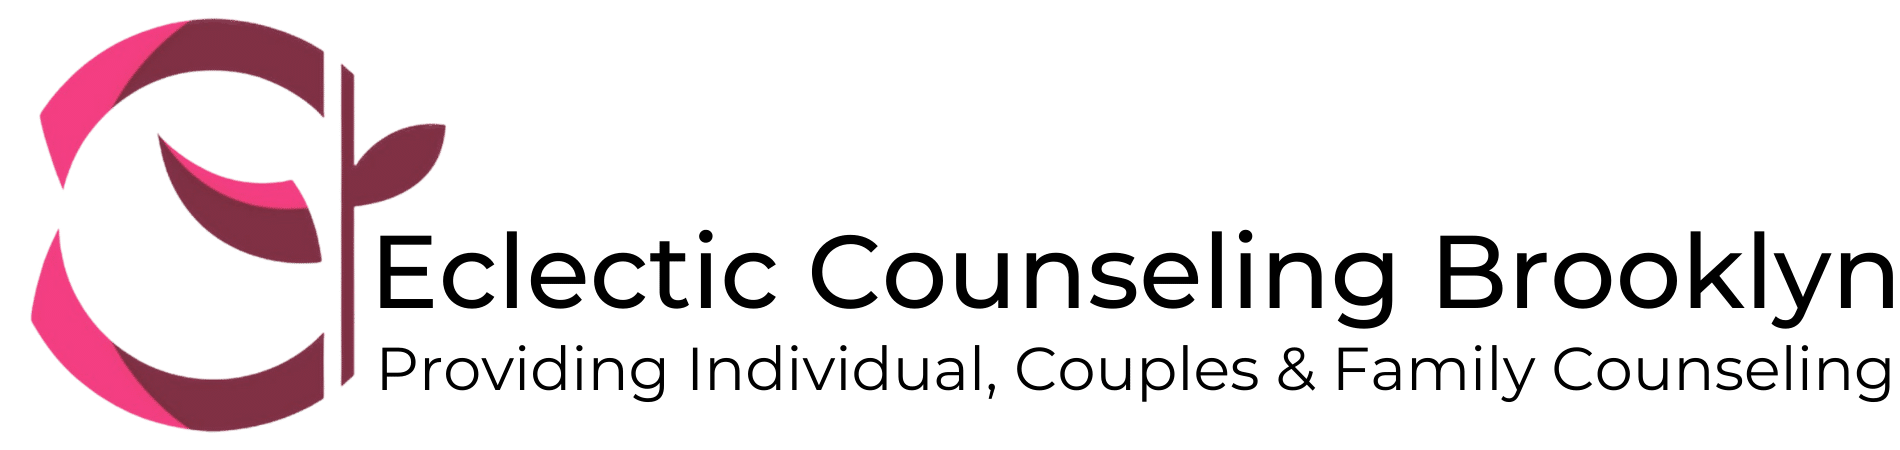 Eclectic Counseling Brooklyn